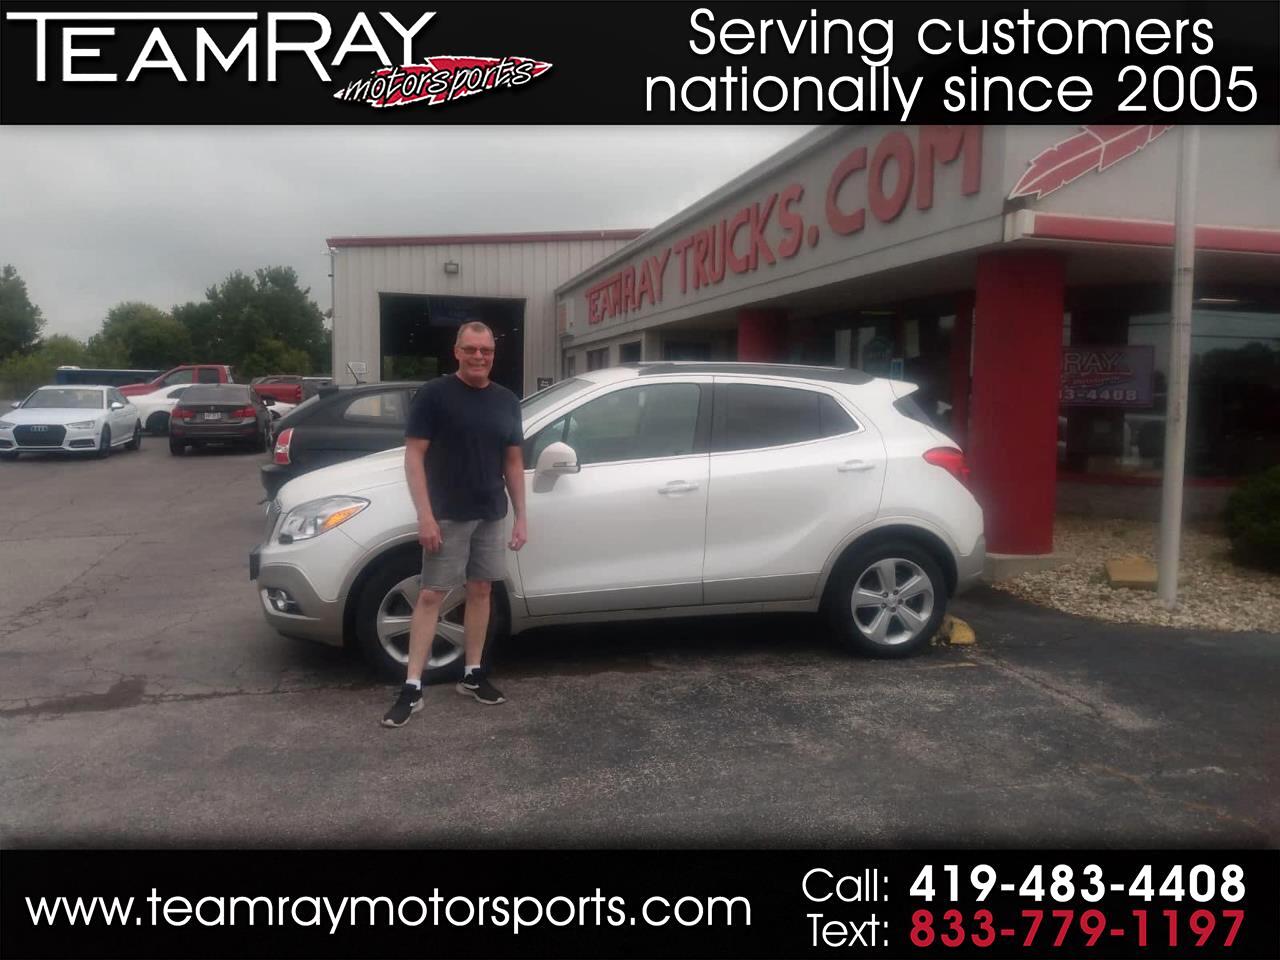 Buick Encore AWD 4dr Leather 2015